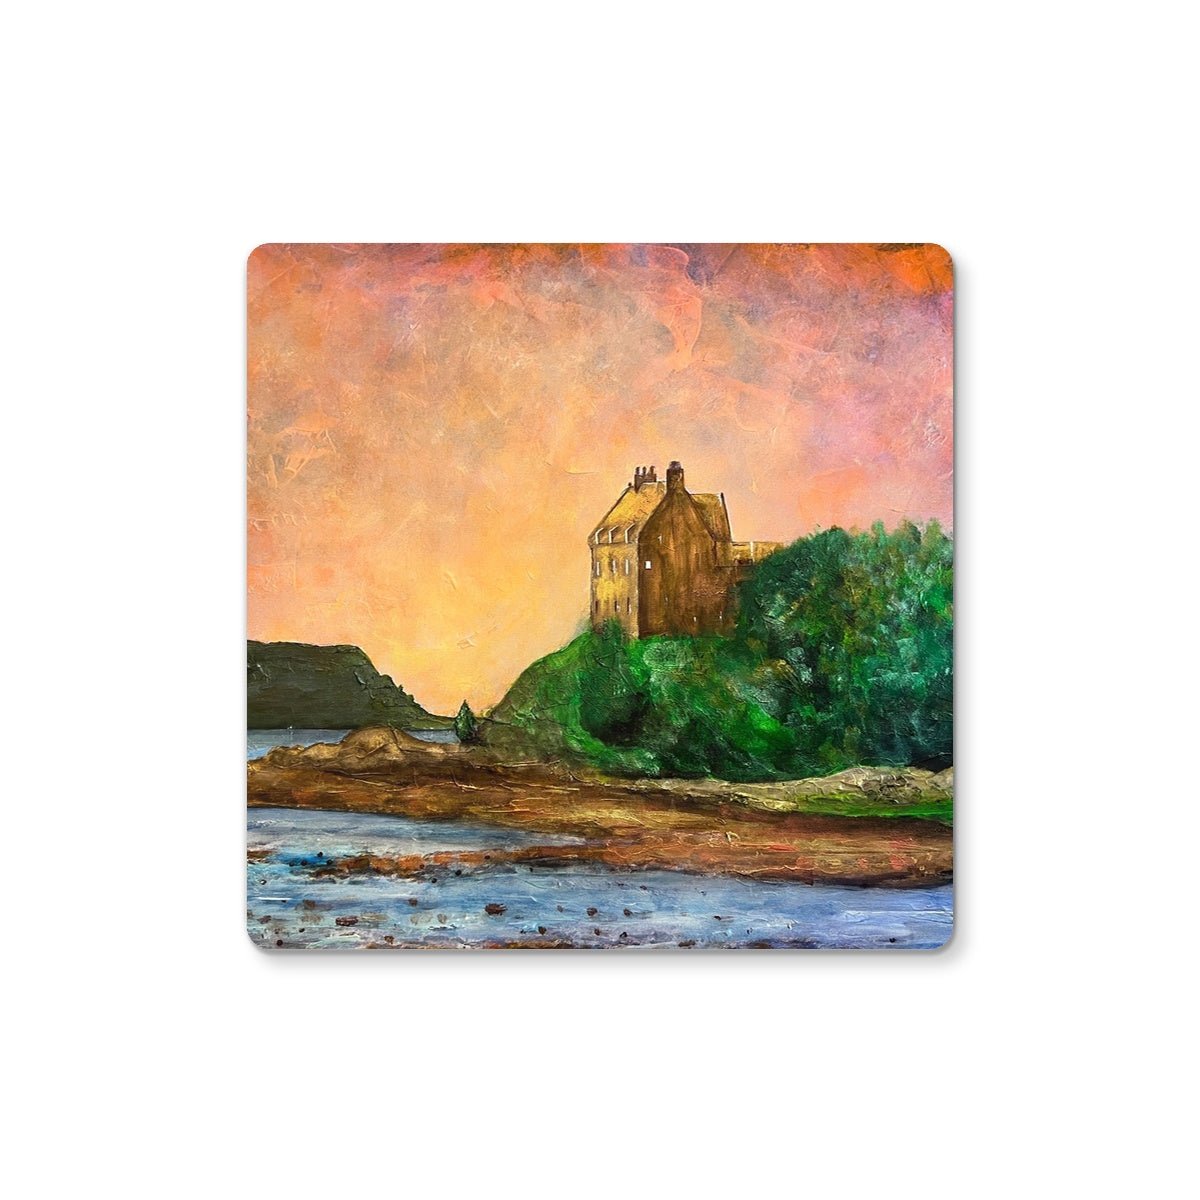 Duntrune Castle Art Gifts Coaster-Coasters-Scottish Castles Art Gallery-2 Coasters-Paintings, Prints, Homeware, Art Gifts From Scotland By Scottish Artist Kevin Hunter